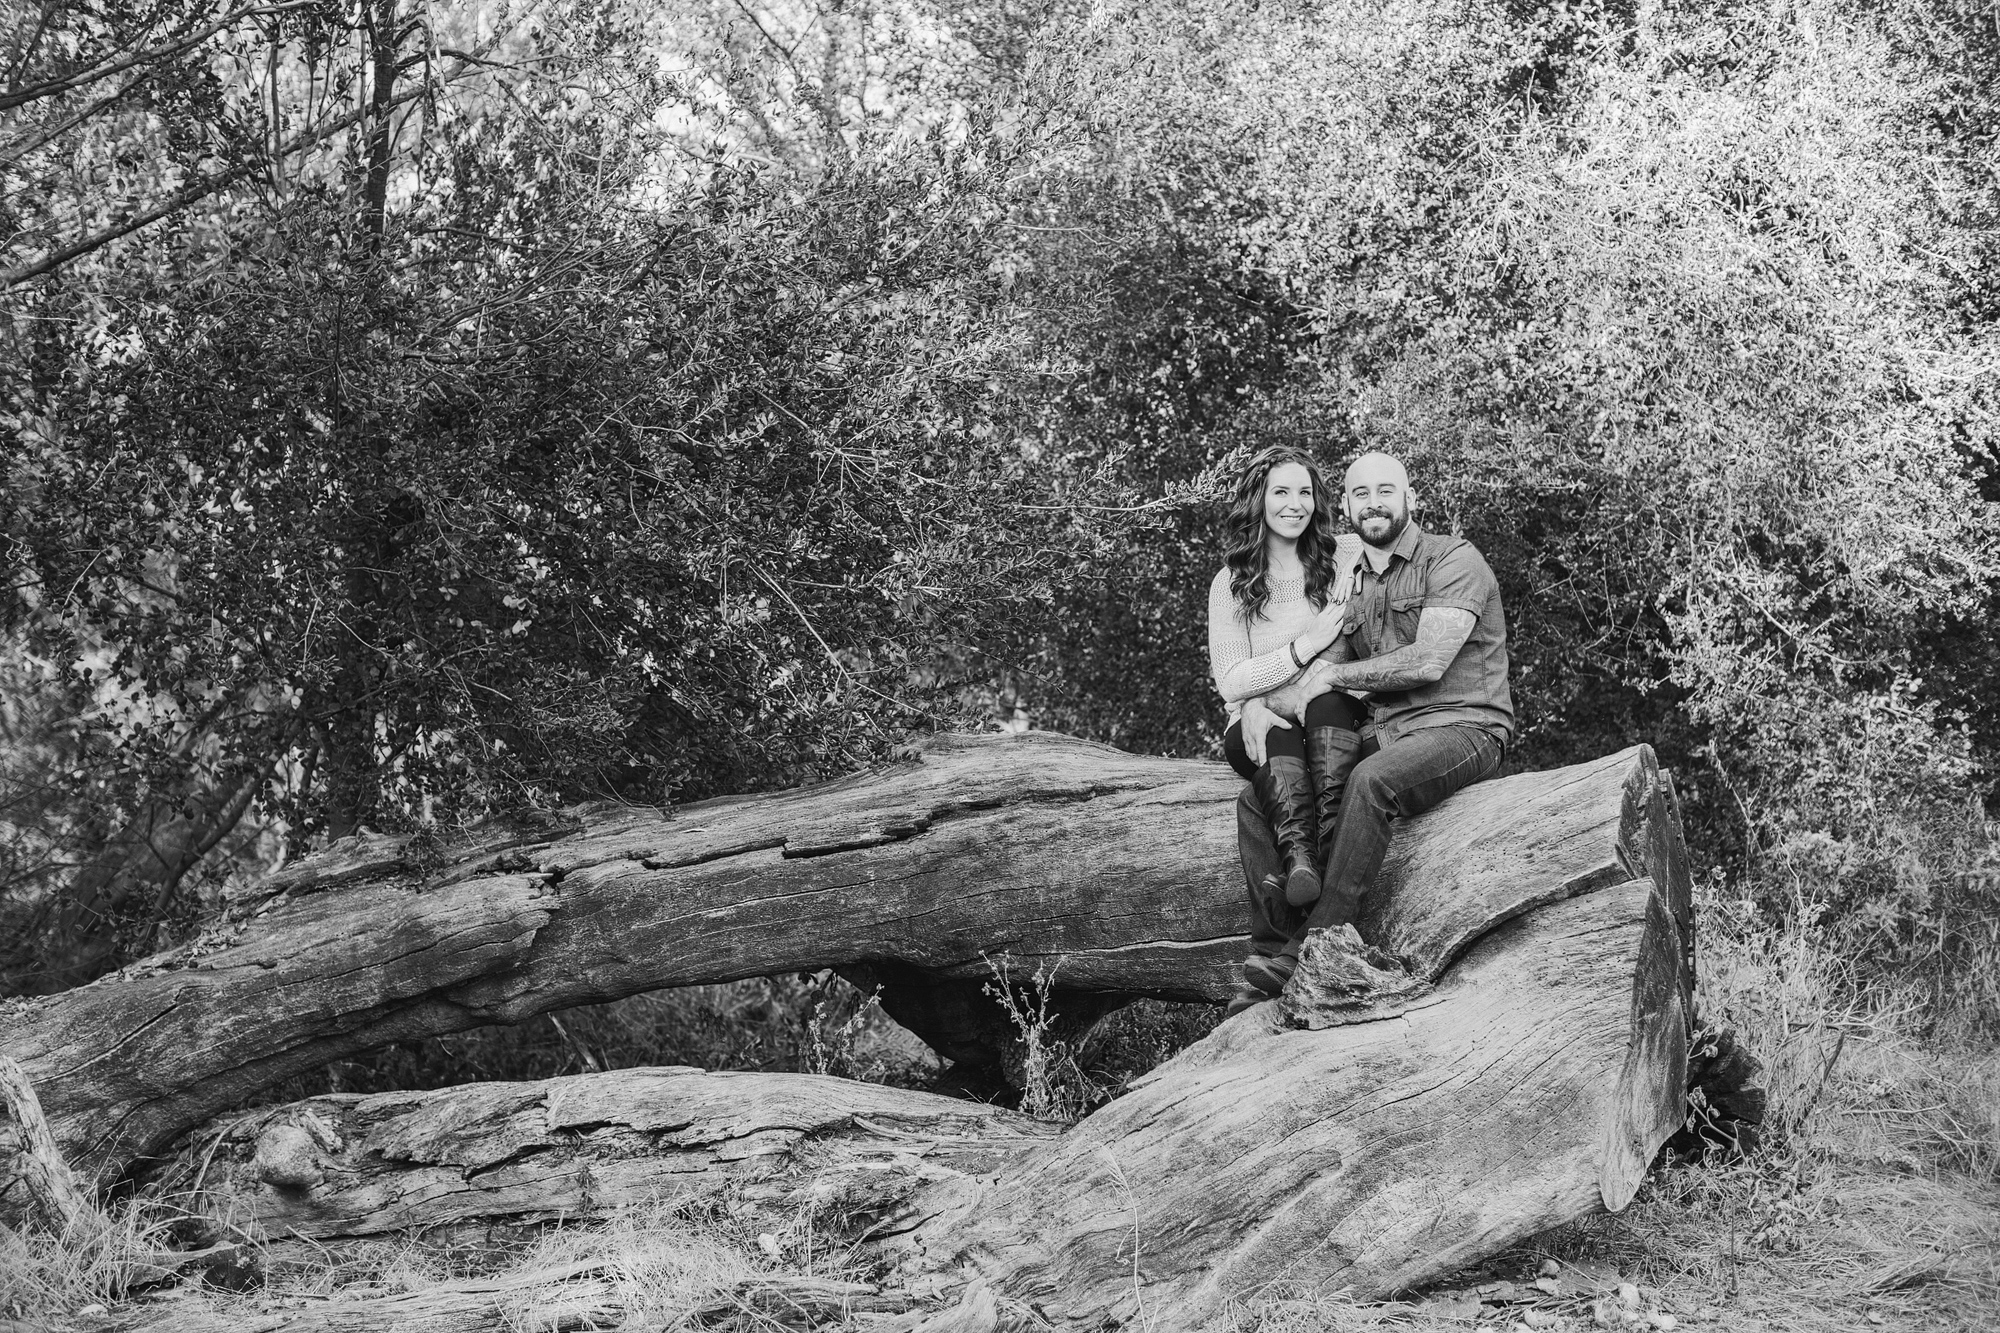 Shara and Steven sitting on a fallen tree. 